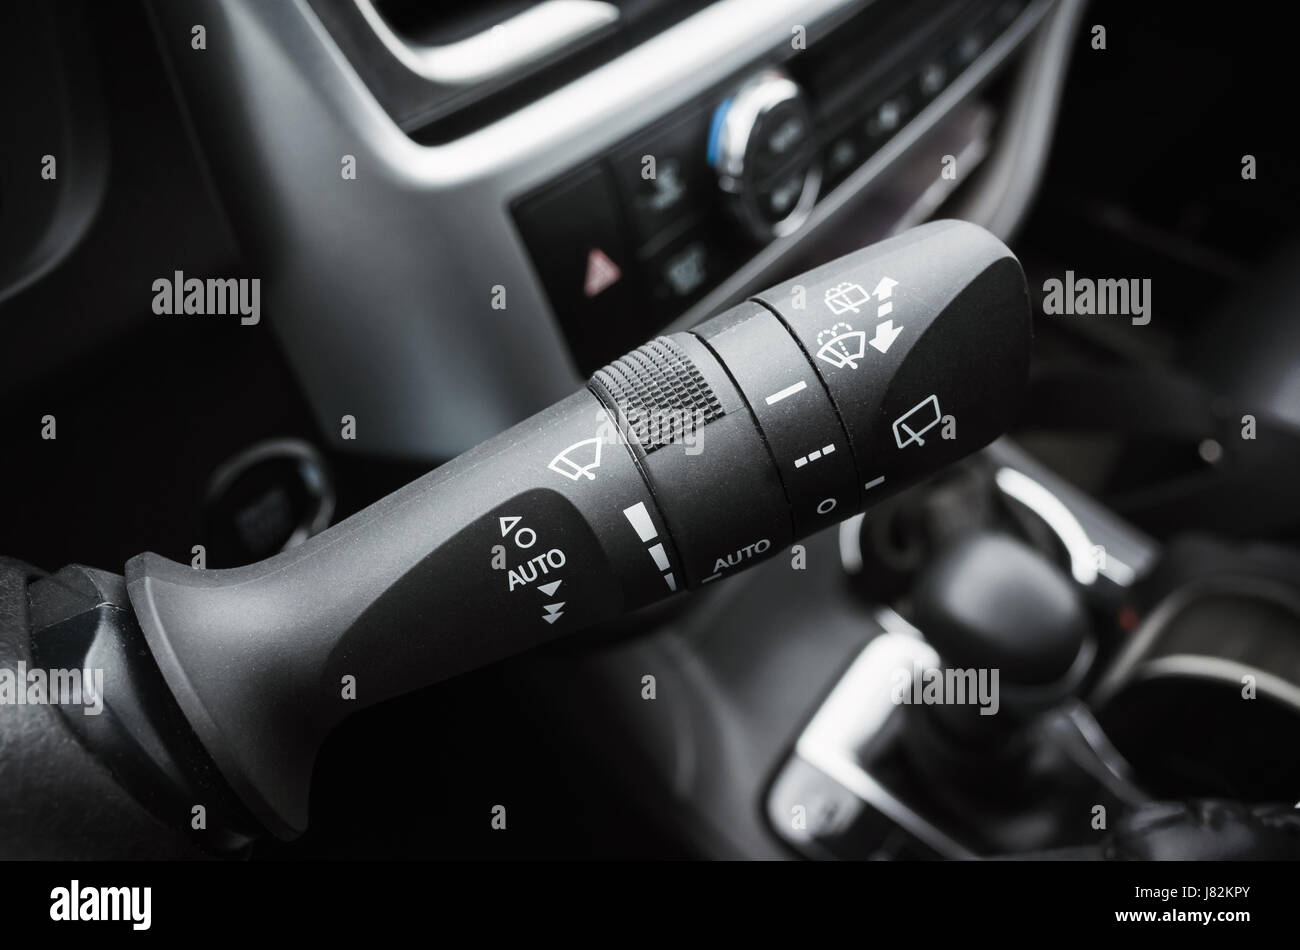 Multi functional wipers mode selector, modern car interior details Stock Photo